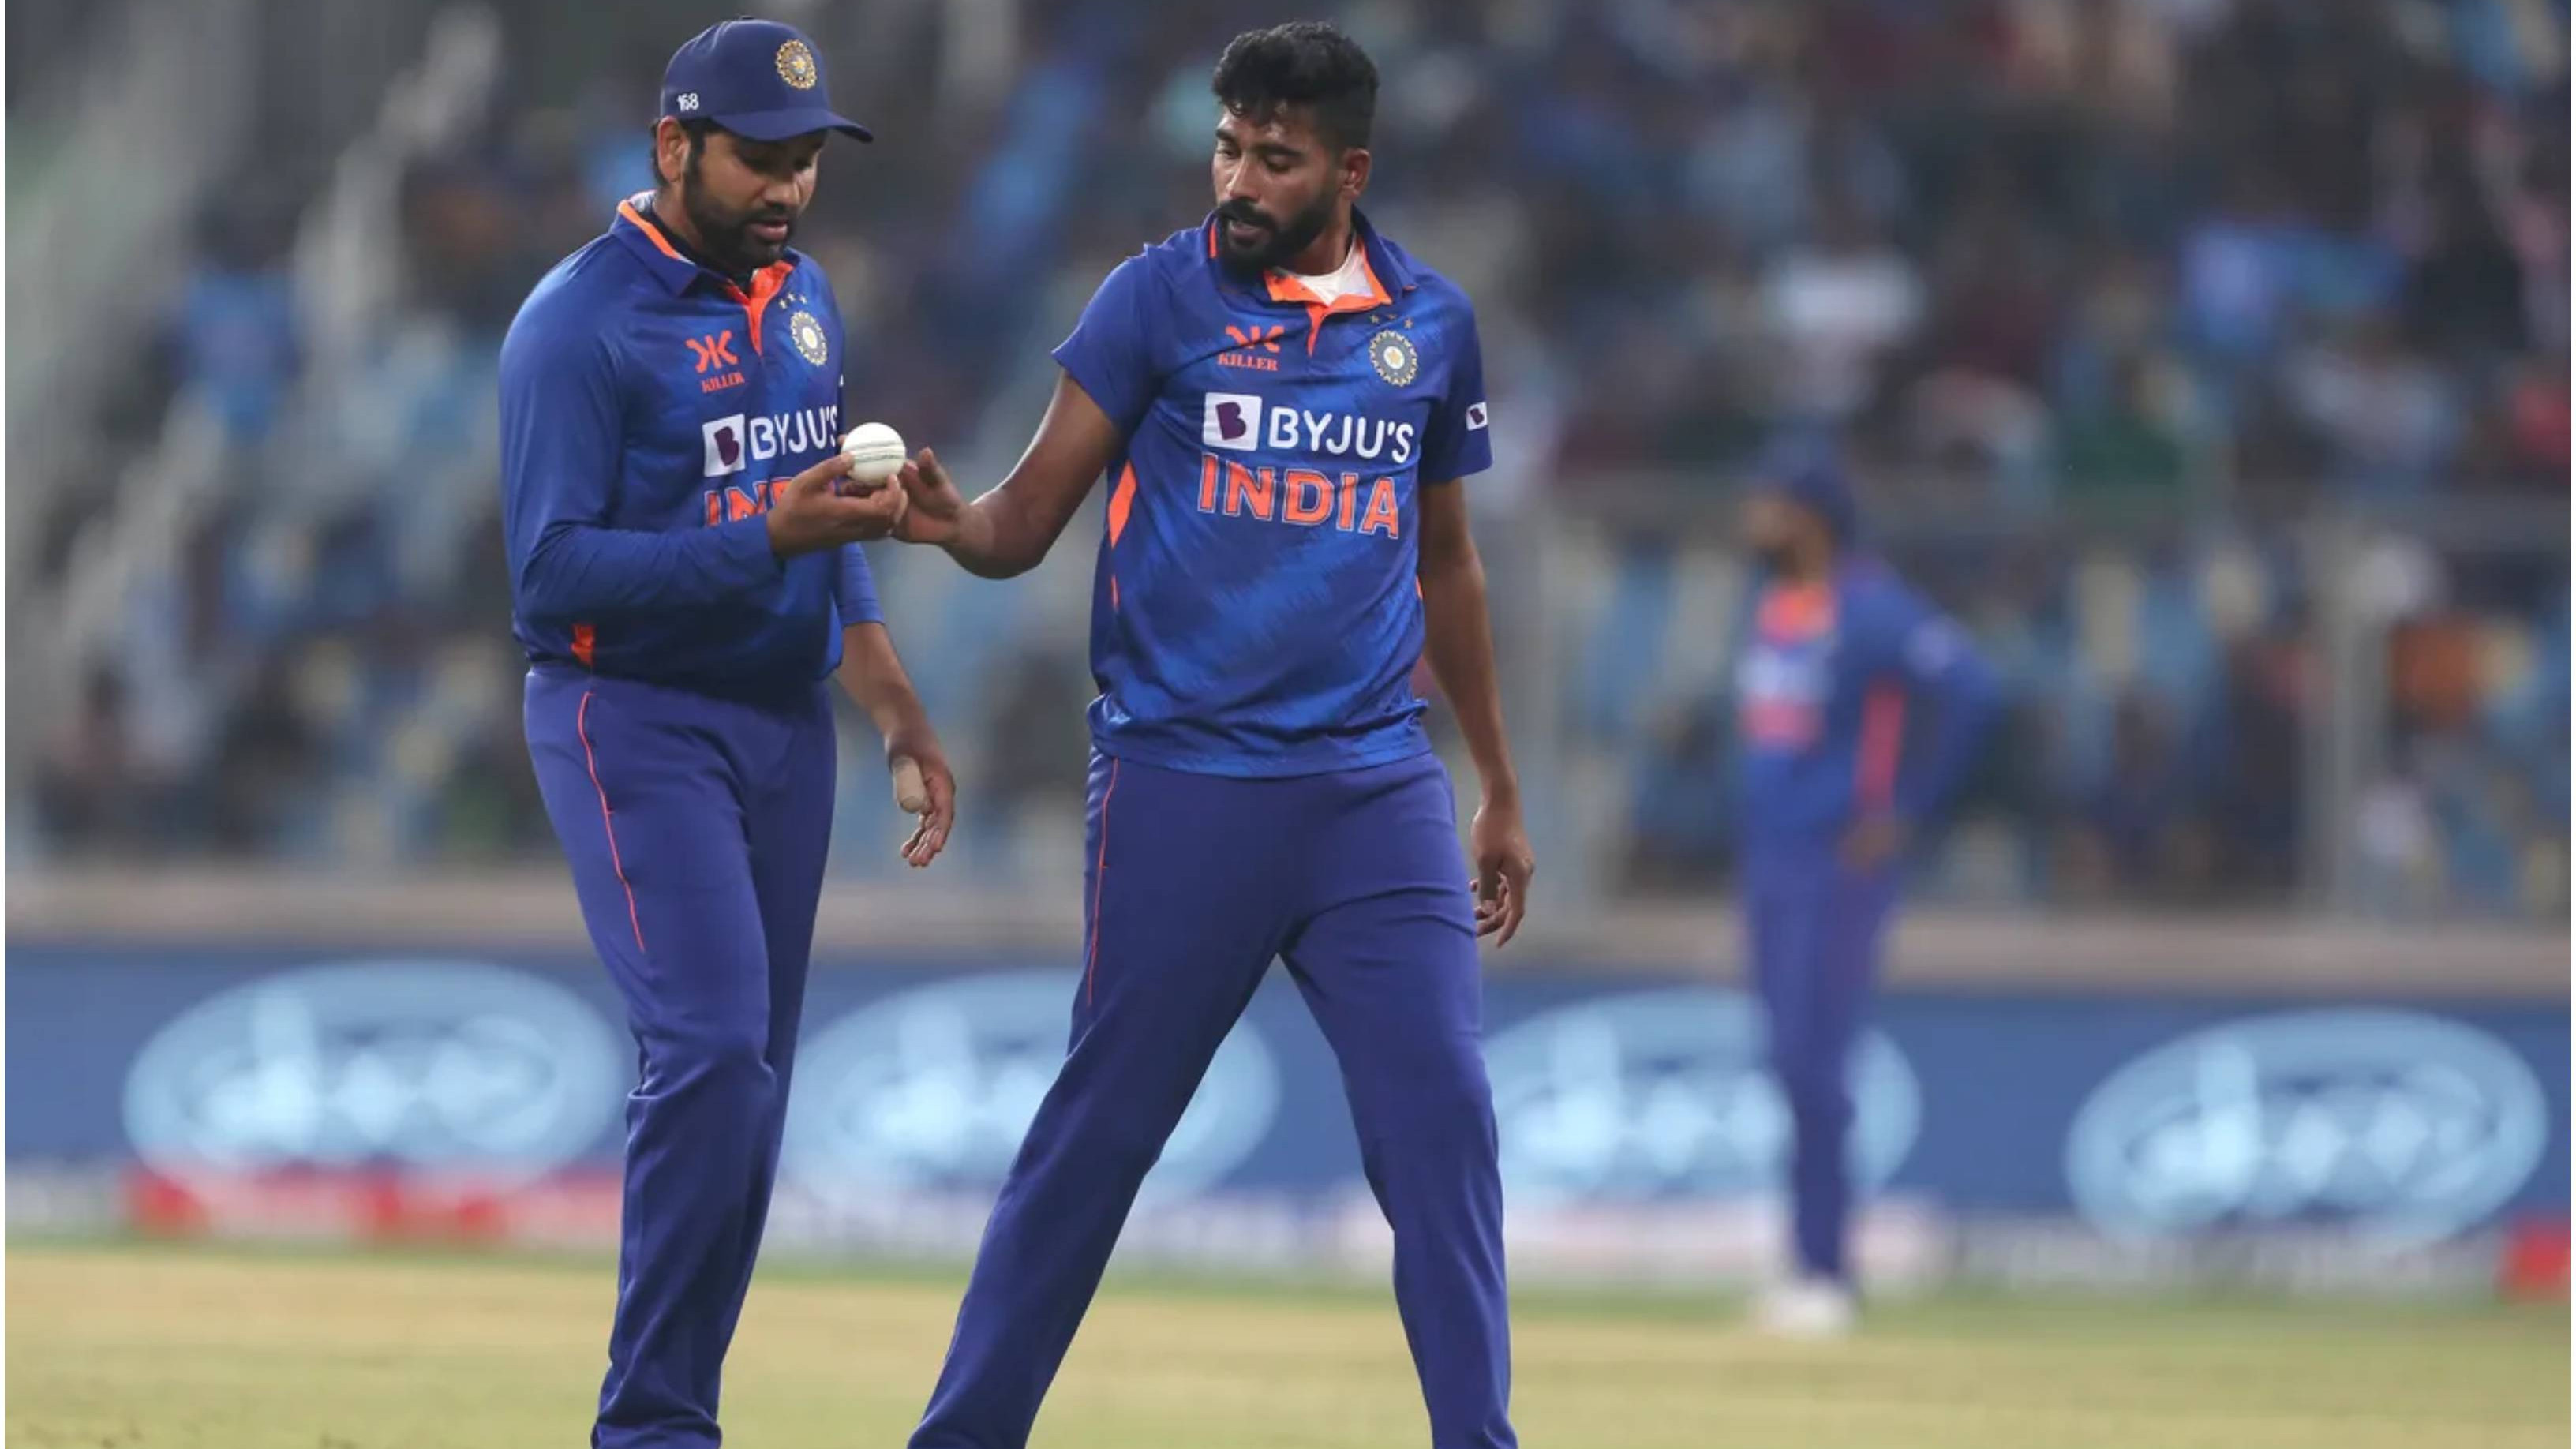 IND v SL 2023: “He is a rare talent,” Rohit Sharma lauds Mohammed Siraj for his outstanding spell in 3rd ODI